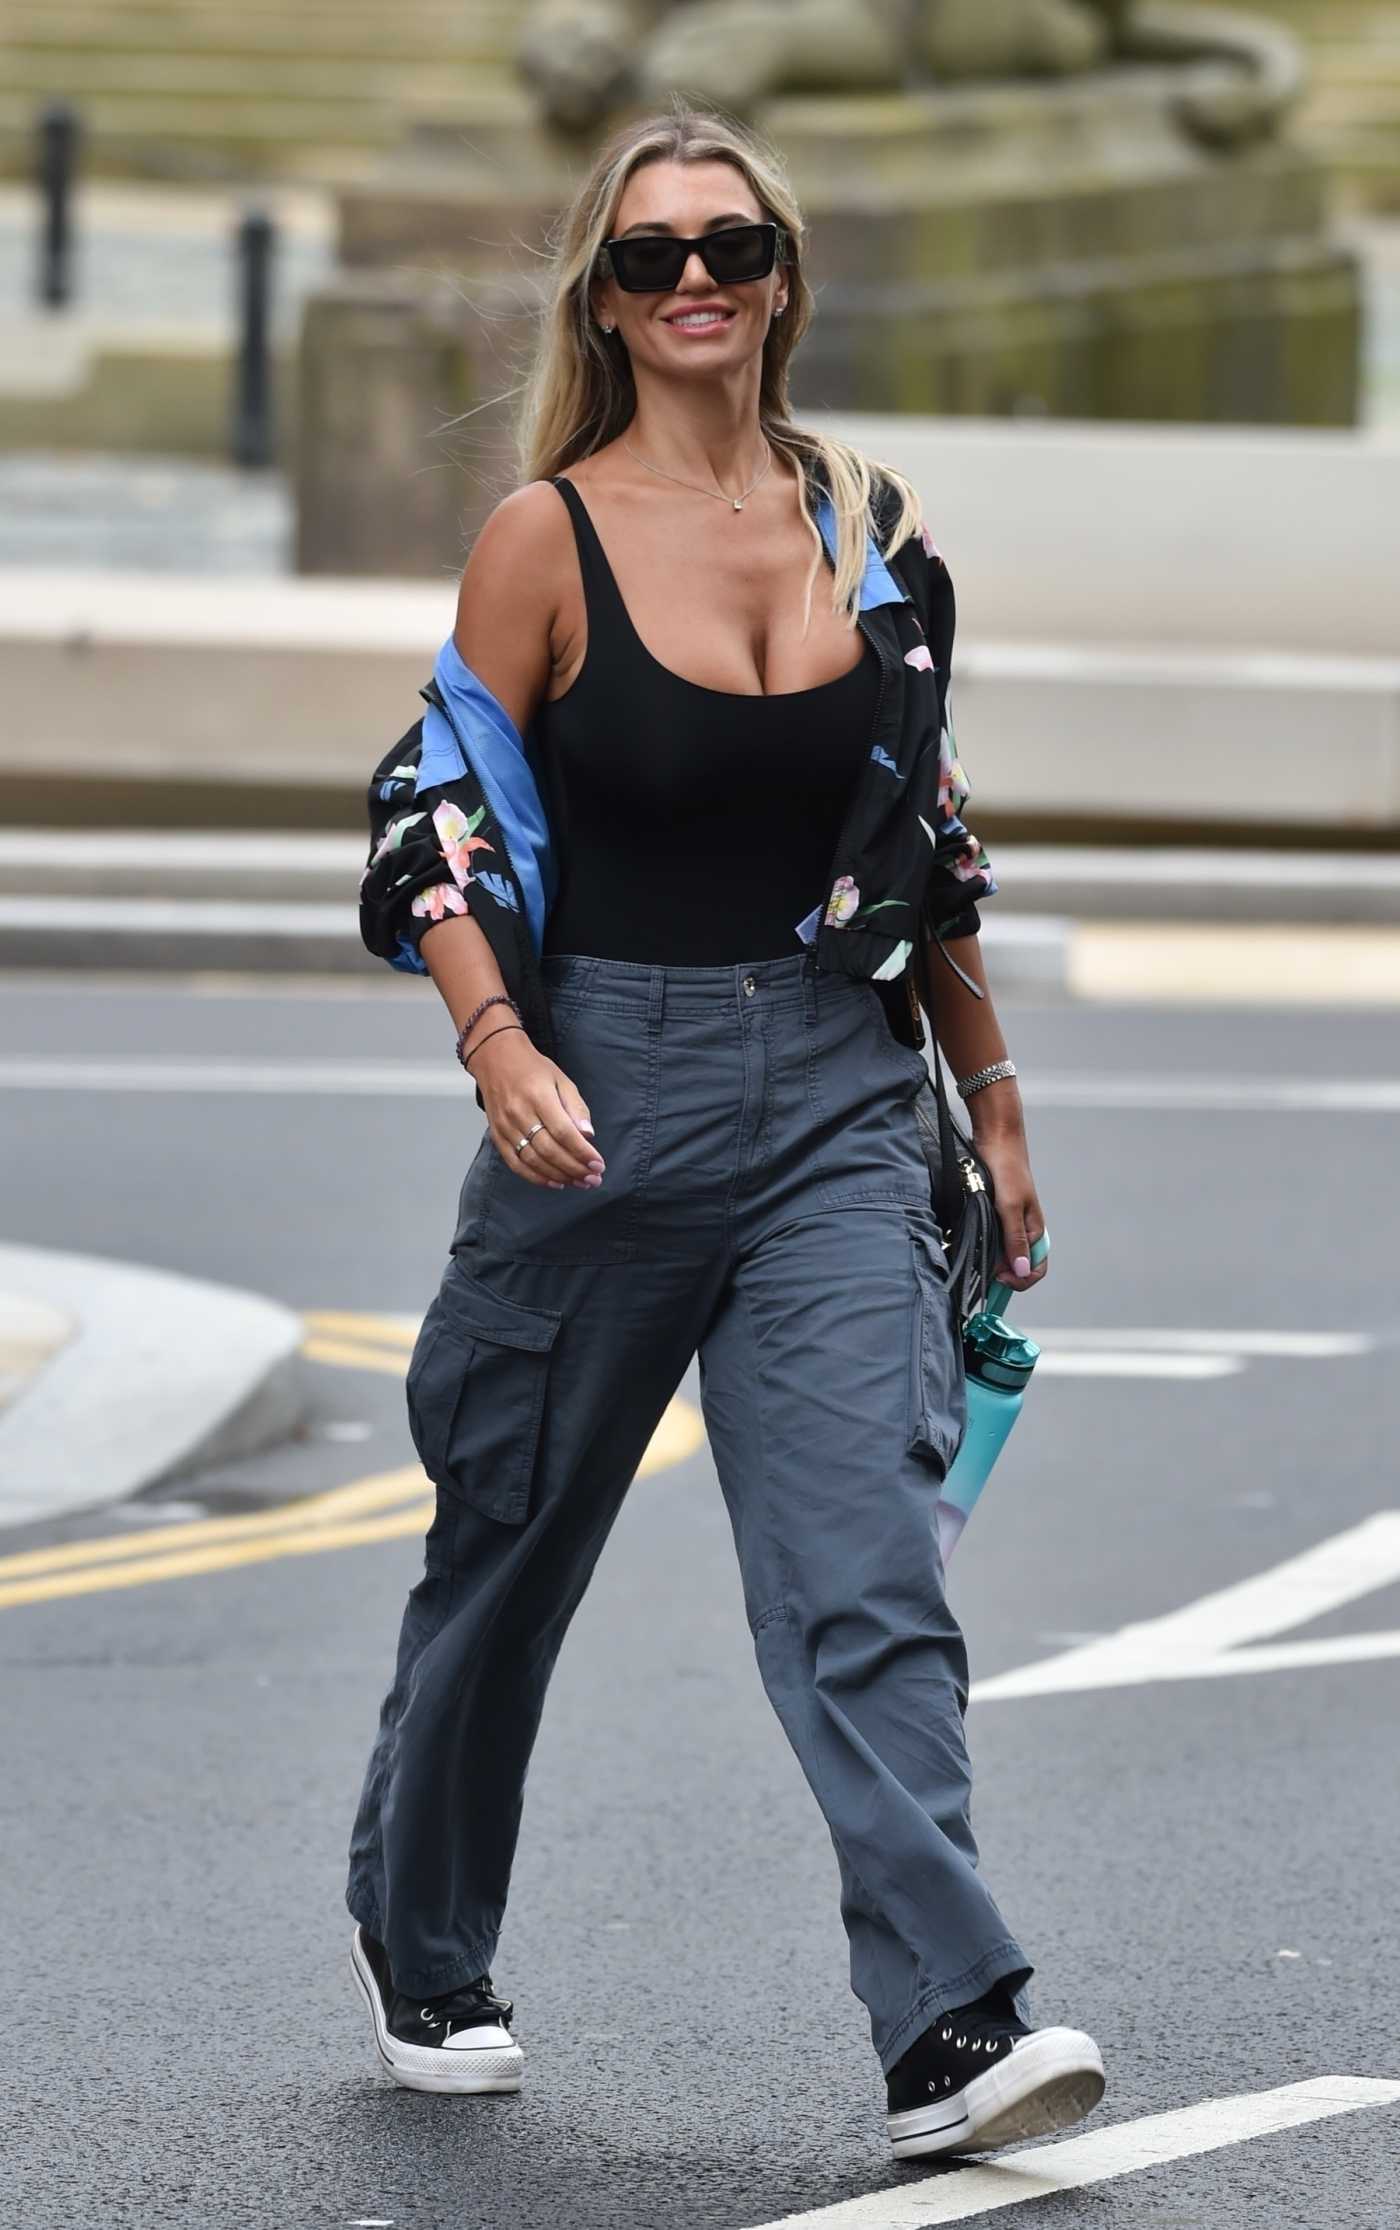 Christine McGuinness in a Black Top Leaves Radio City After Presenting the Breakfast Show in Liverpool 08/24/2023